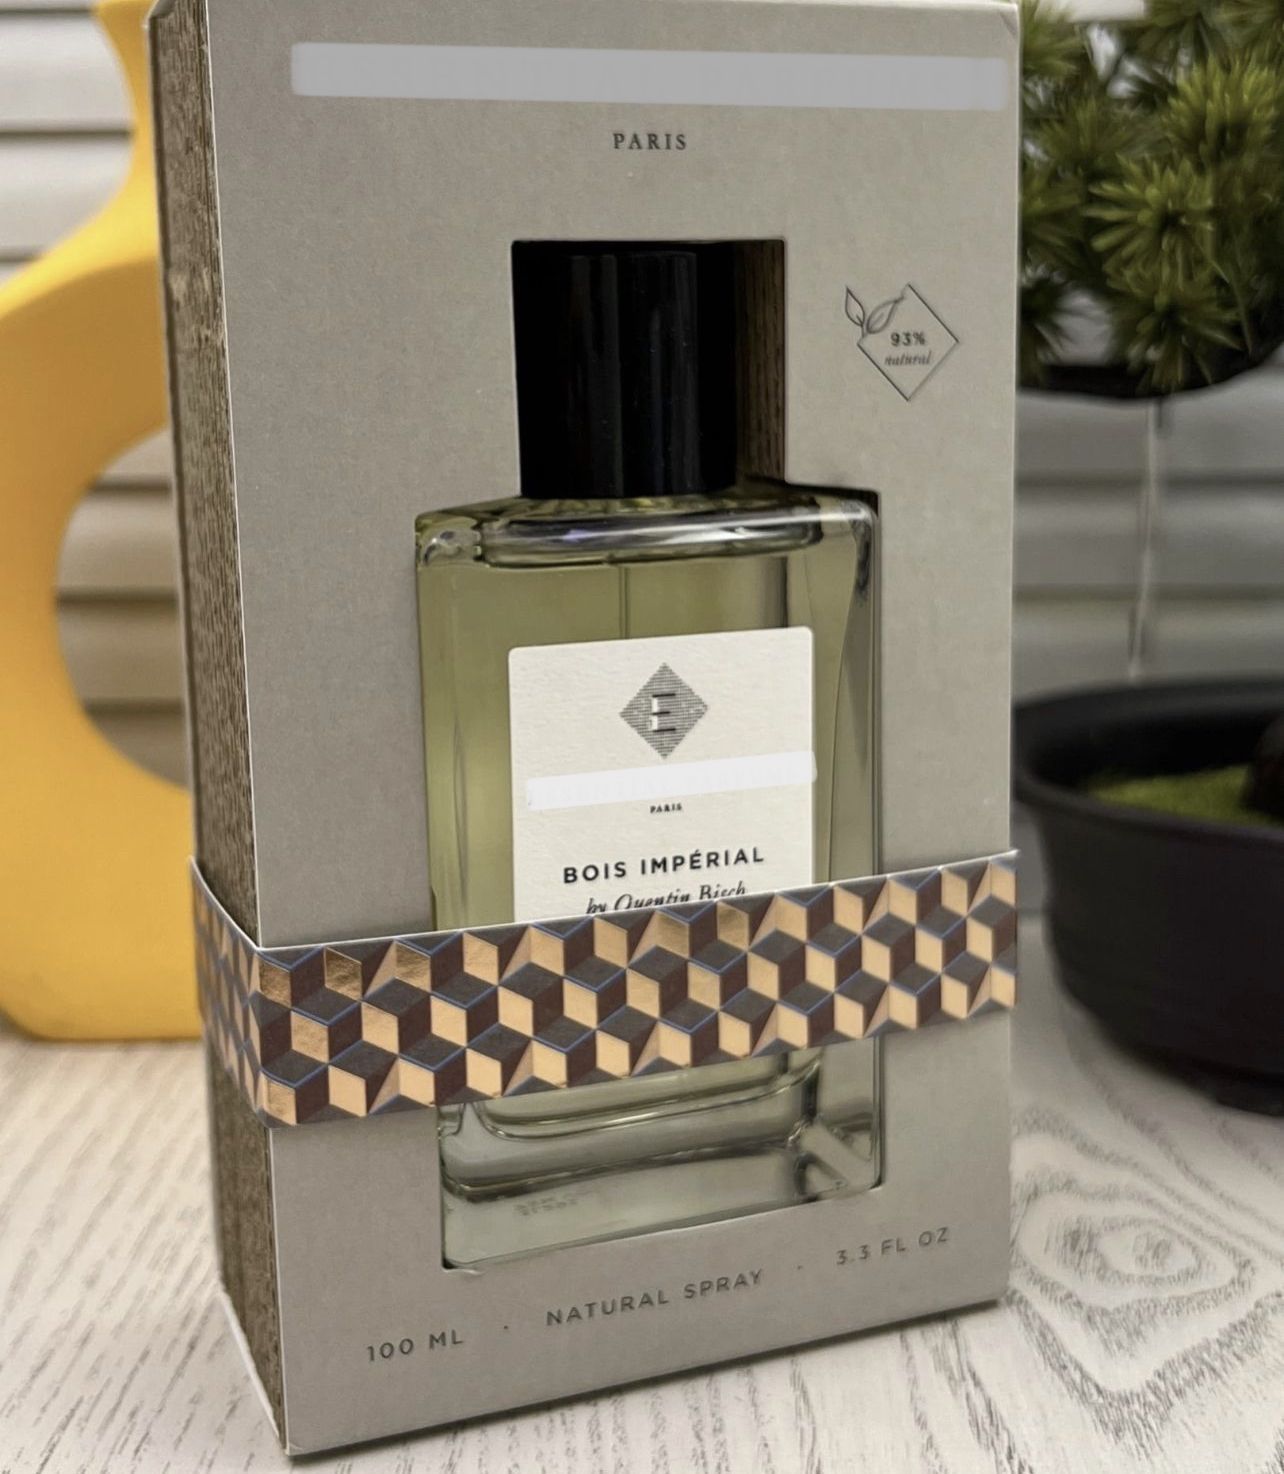 Essential parfums bois imperial оригинал. Эссеншиал Парфюм бойс Империал. Буа Империал Парфюм. Essential Parfums парфюмерная вода bois Imperial. Essential Parfums Paris bois Imperial by Quentin bisch.